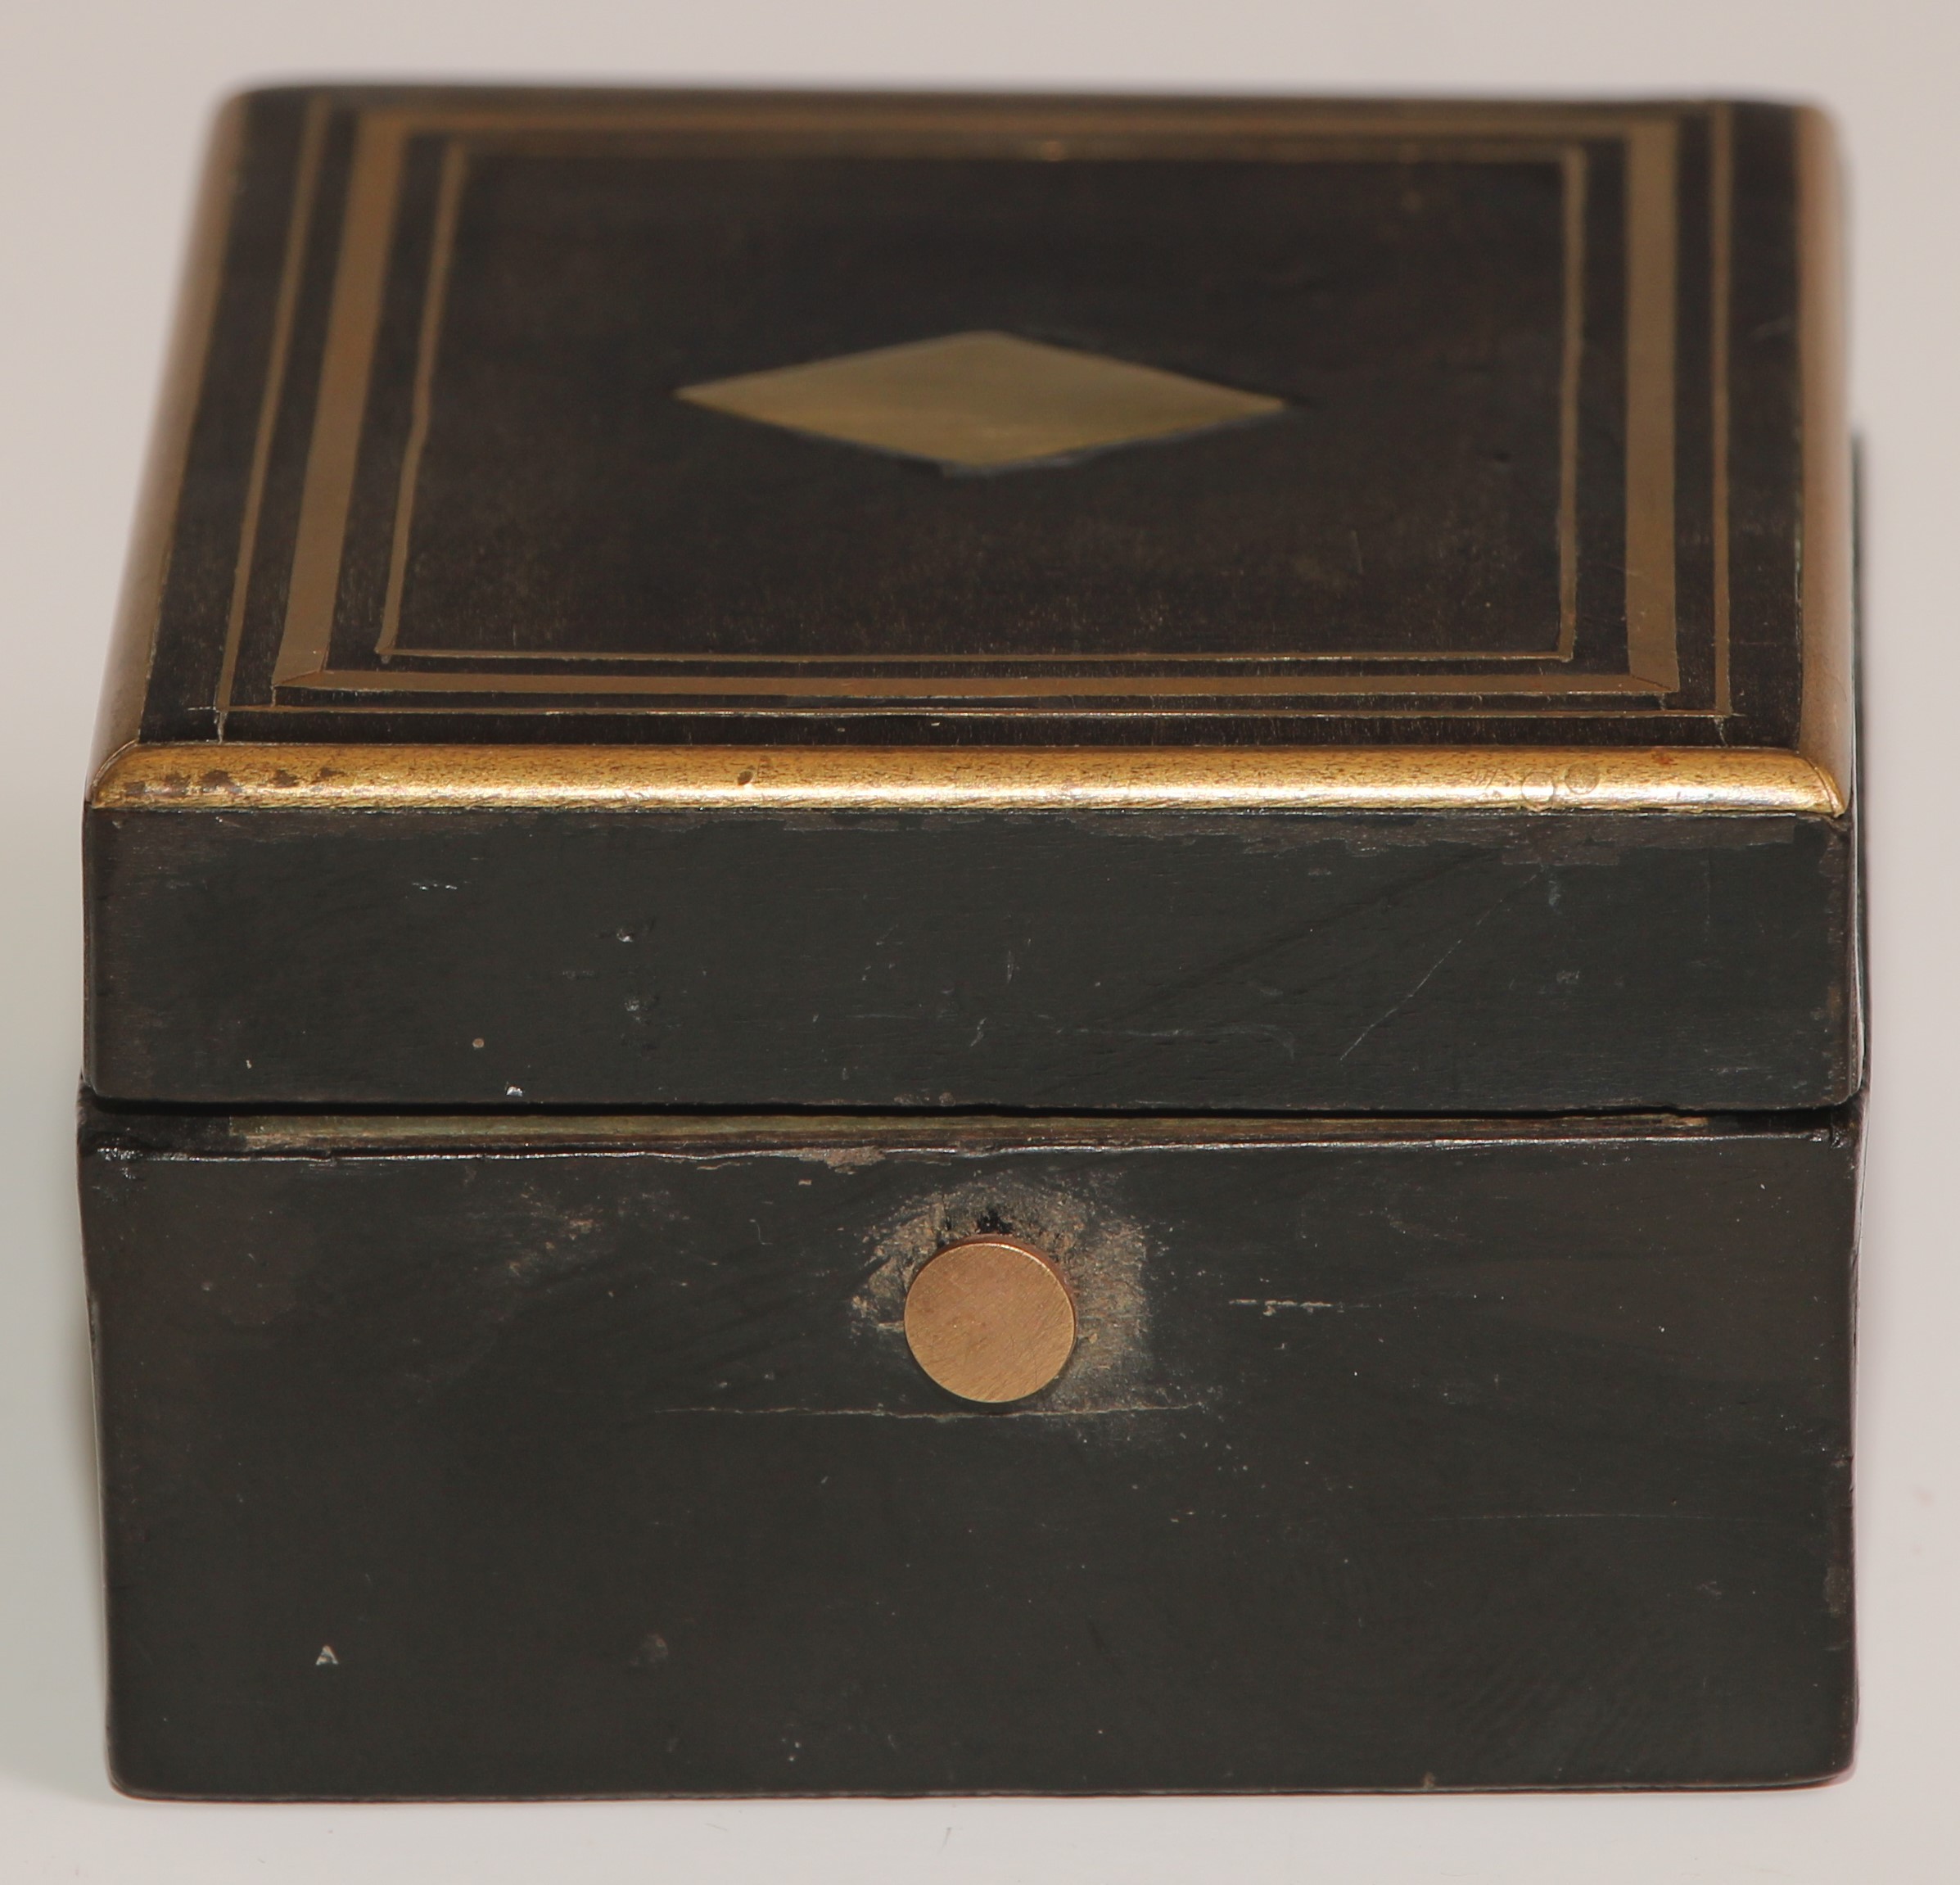 A 19th century French ebonised pocket watch box, hinged cover inlaid with a lozenge and outlined